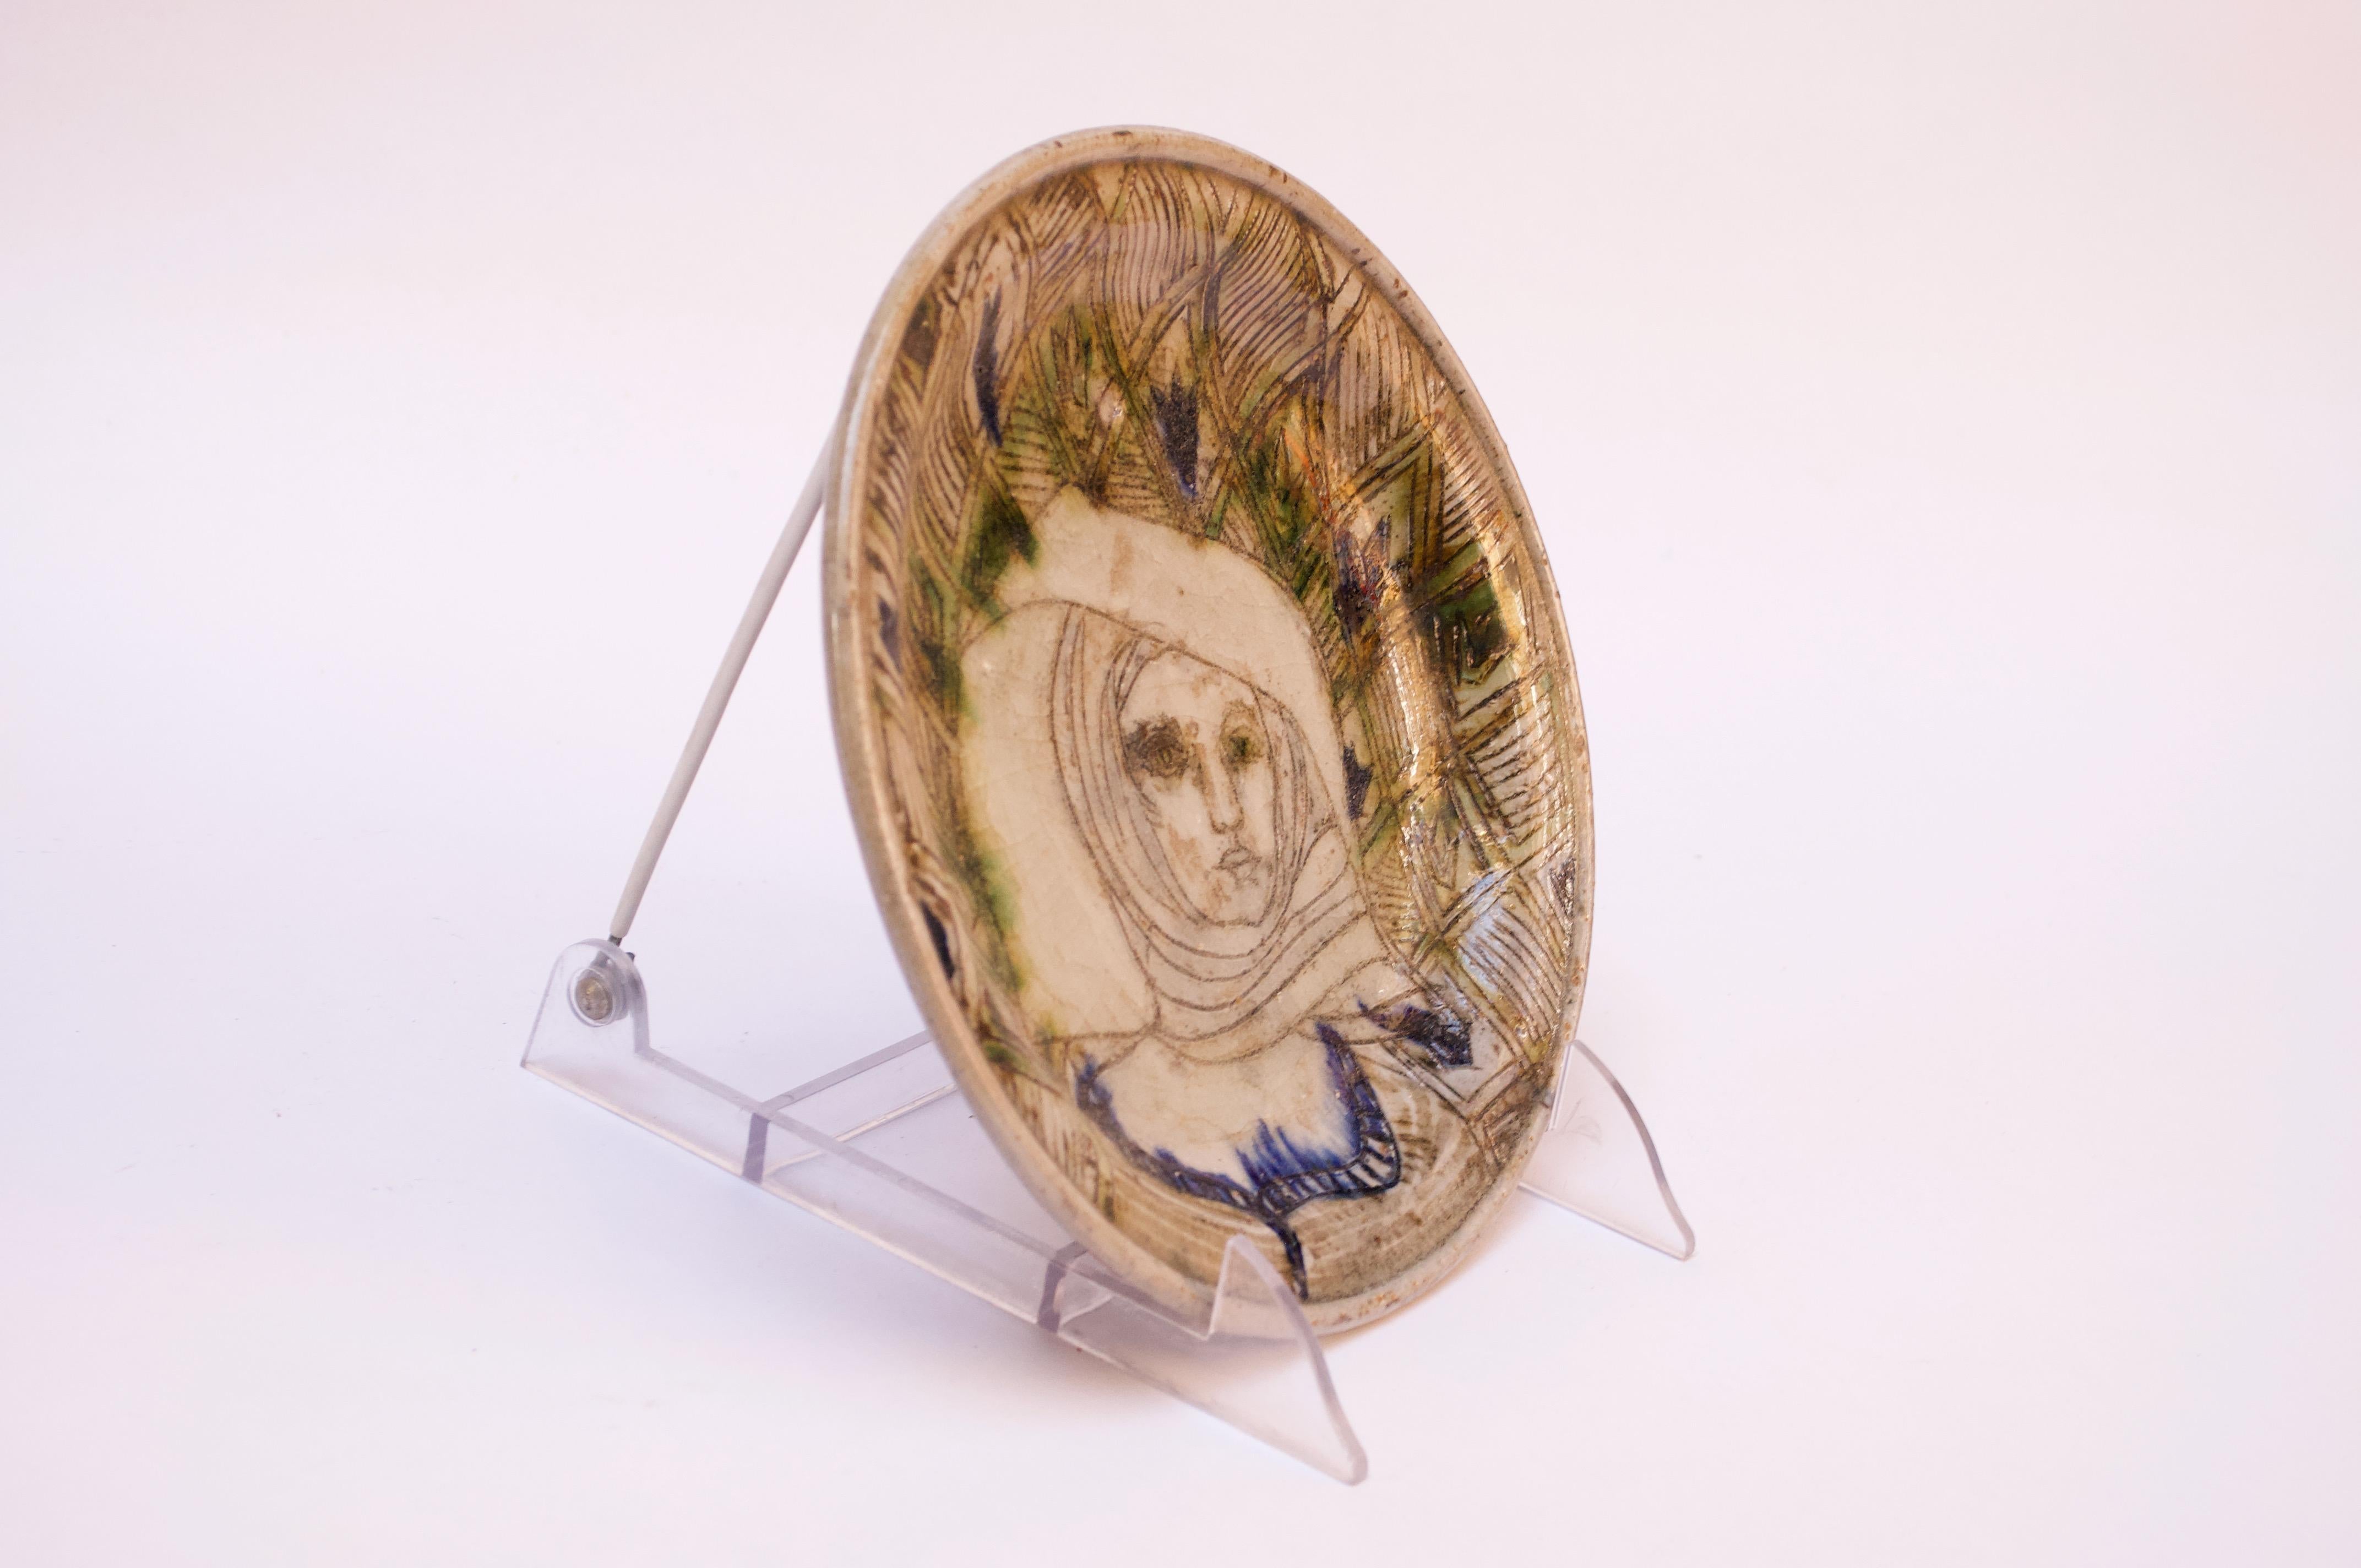 Studio ceramic decorative plate depicting a woman with a headscarf. Linear and geometric details present along with pops of blue and green to enhance the smattering of floral decorations around the central figure. 
Signed 